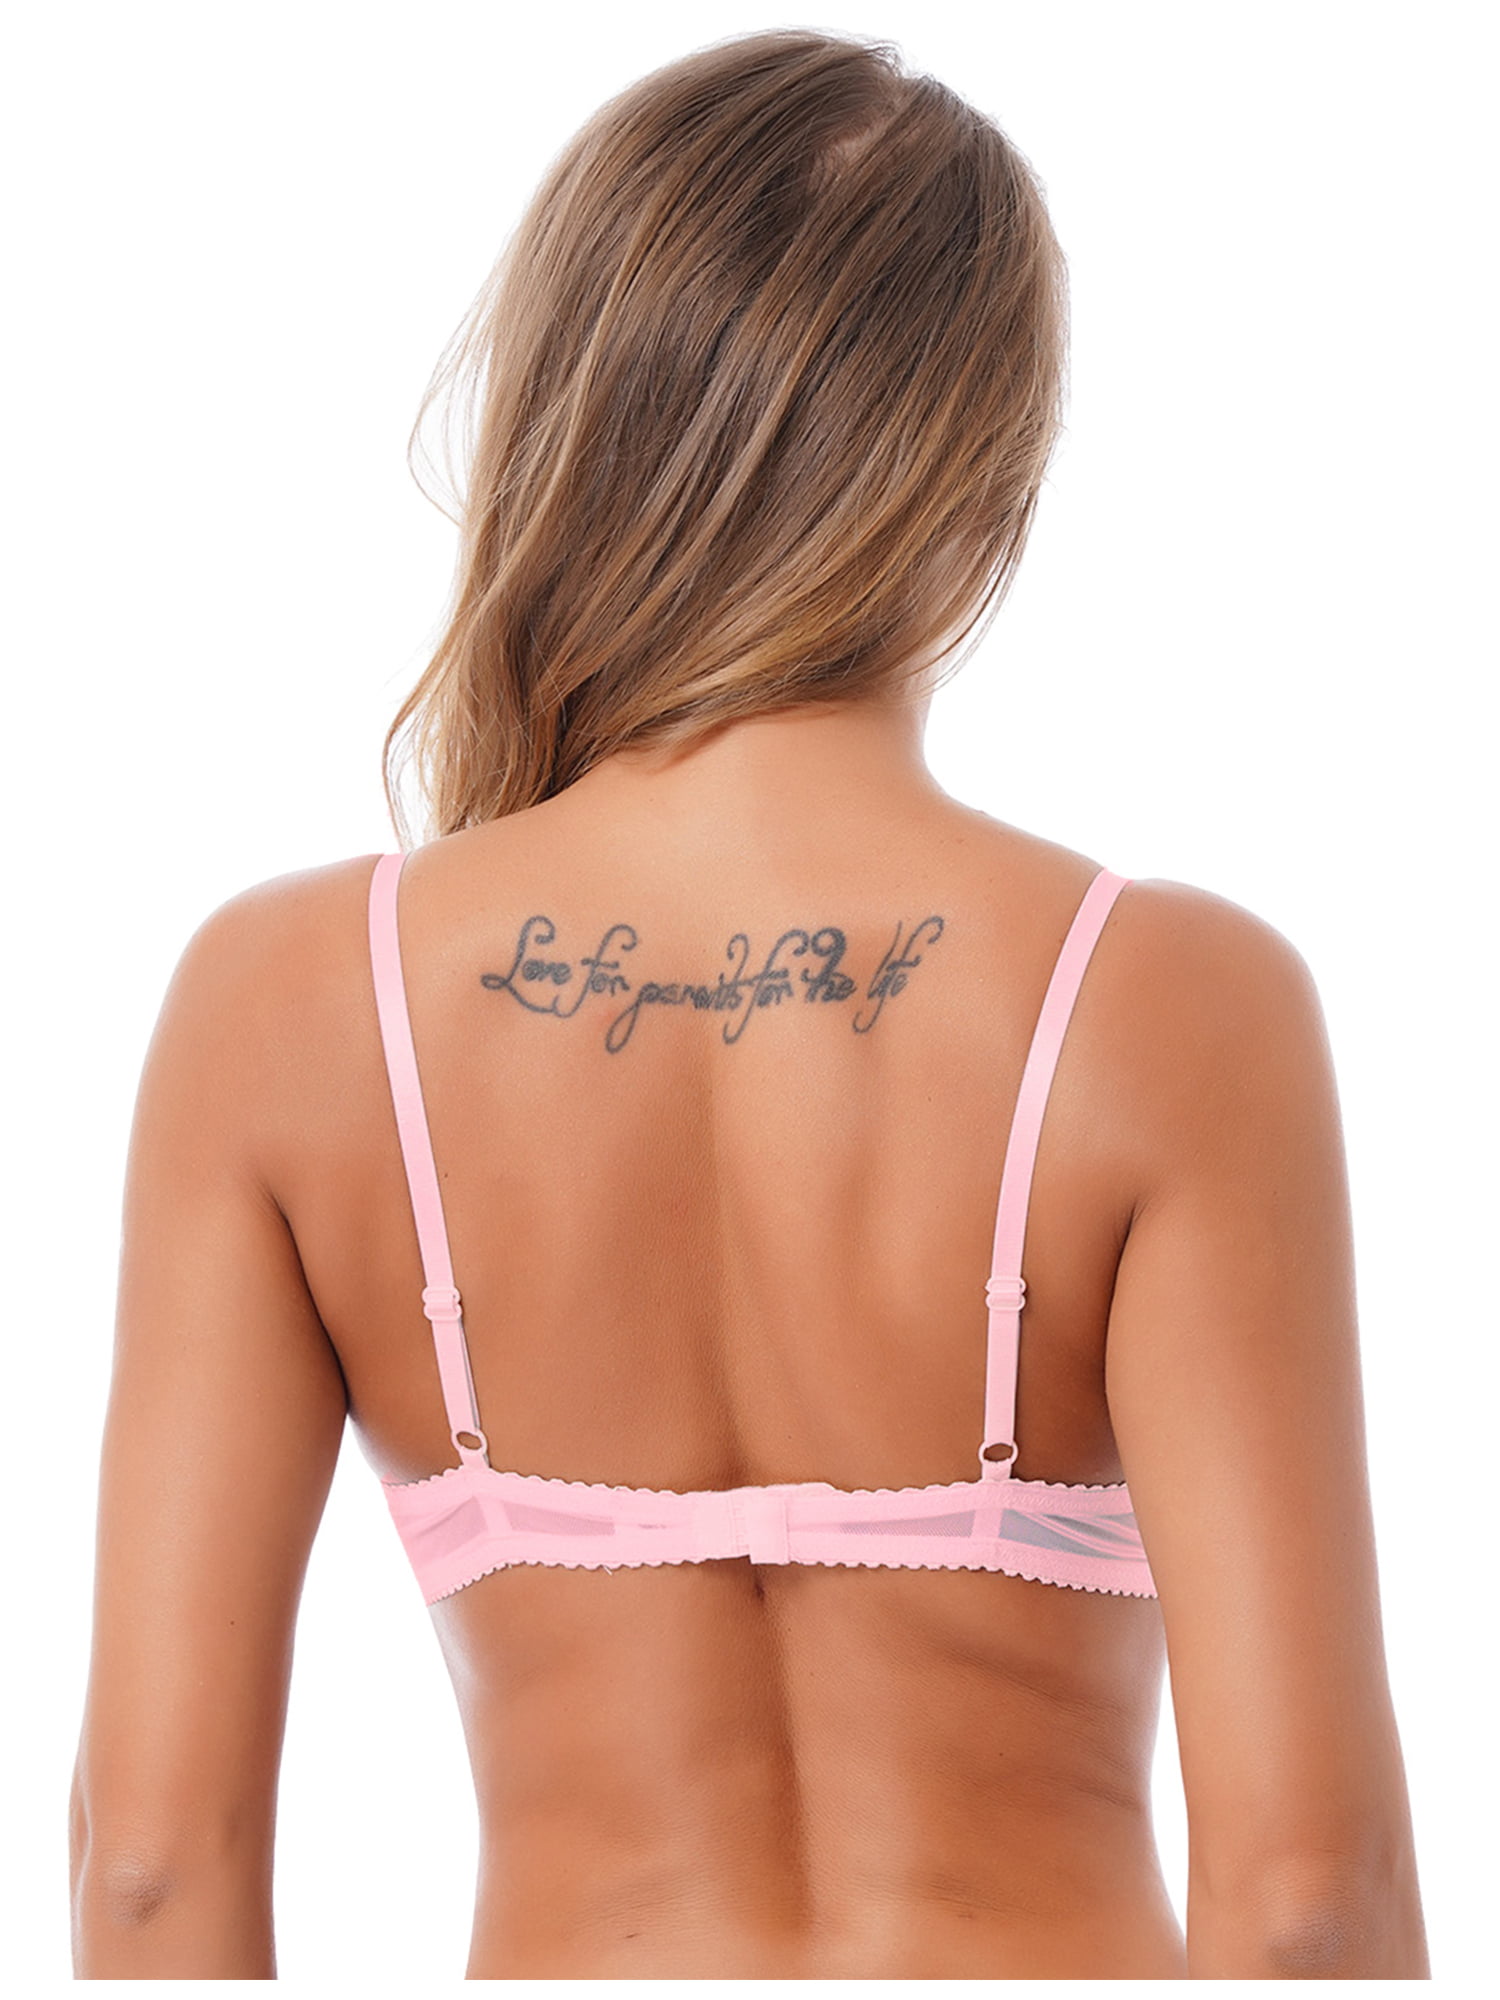 Flawless from Front to Back ~ LIVY Lingerie - Lingerie Briefs ~ by